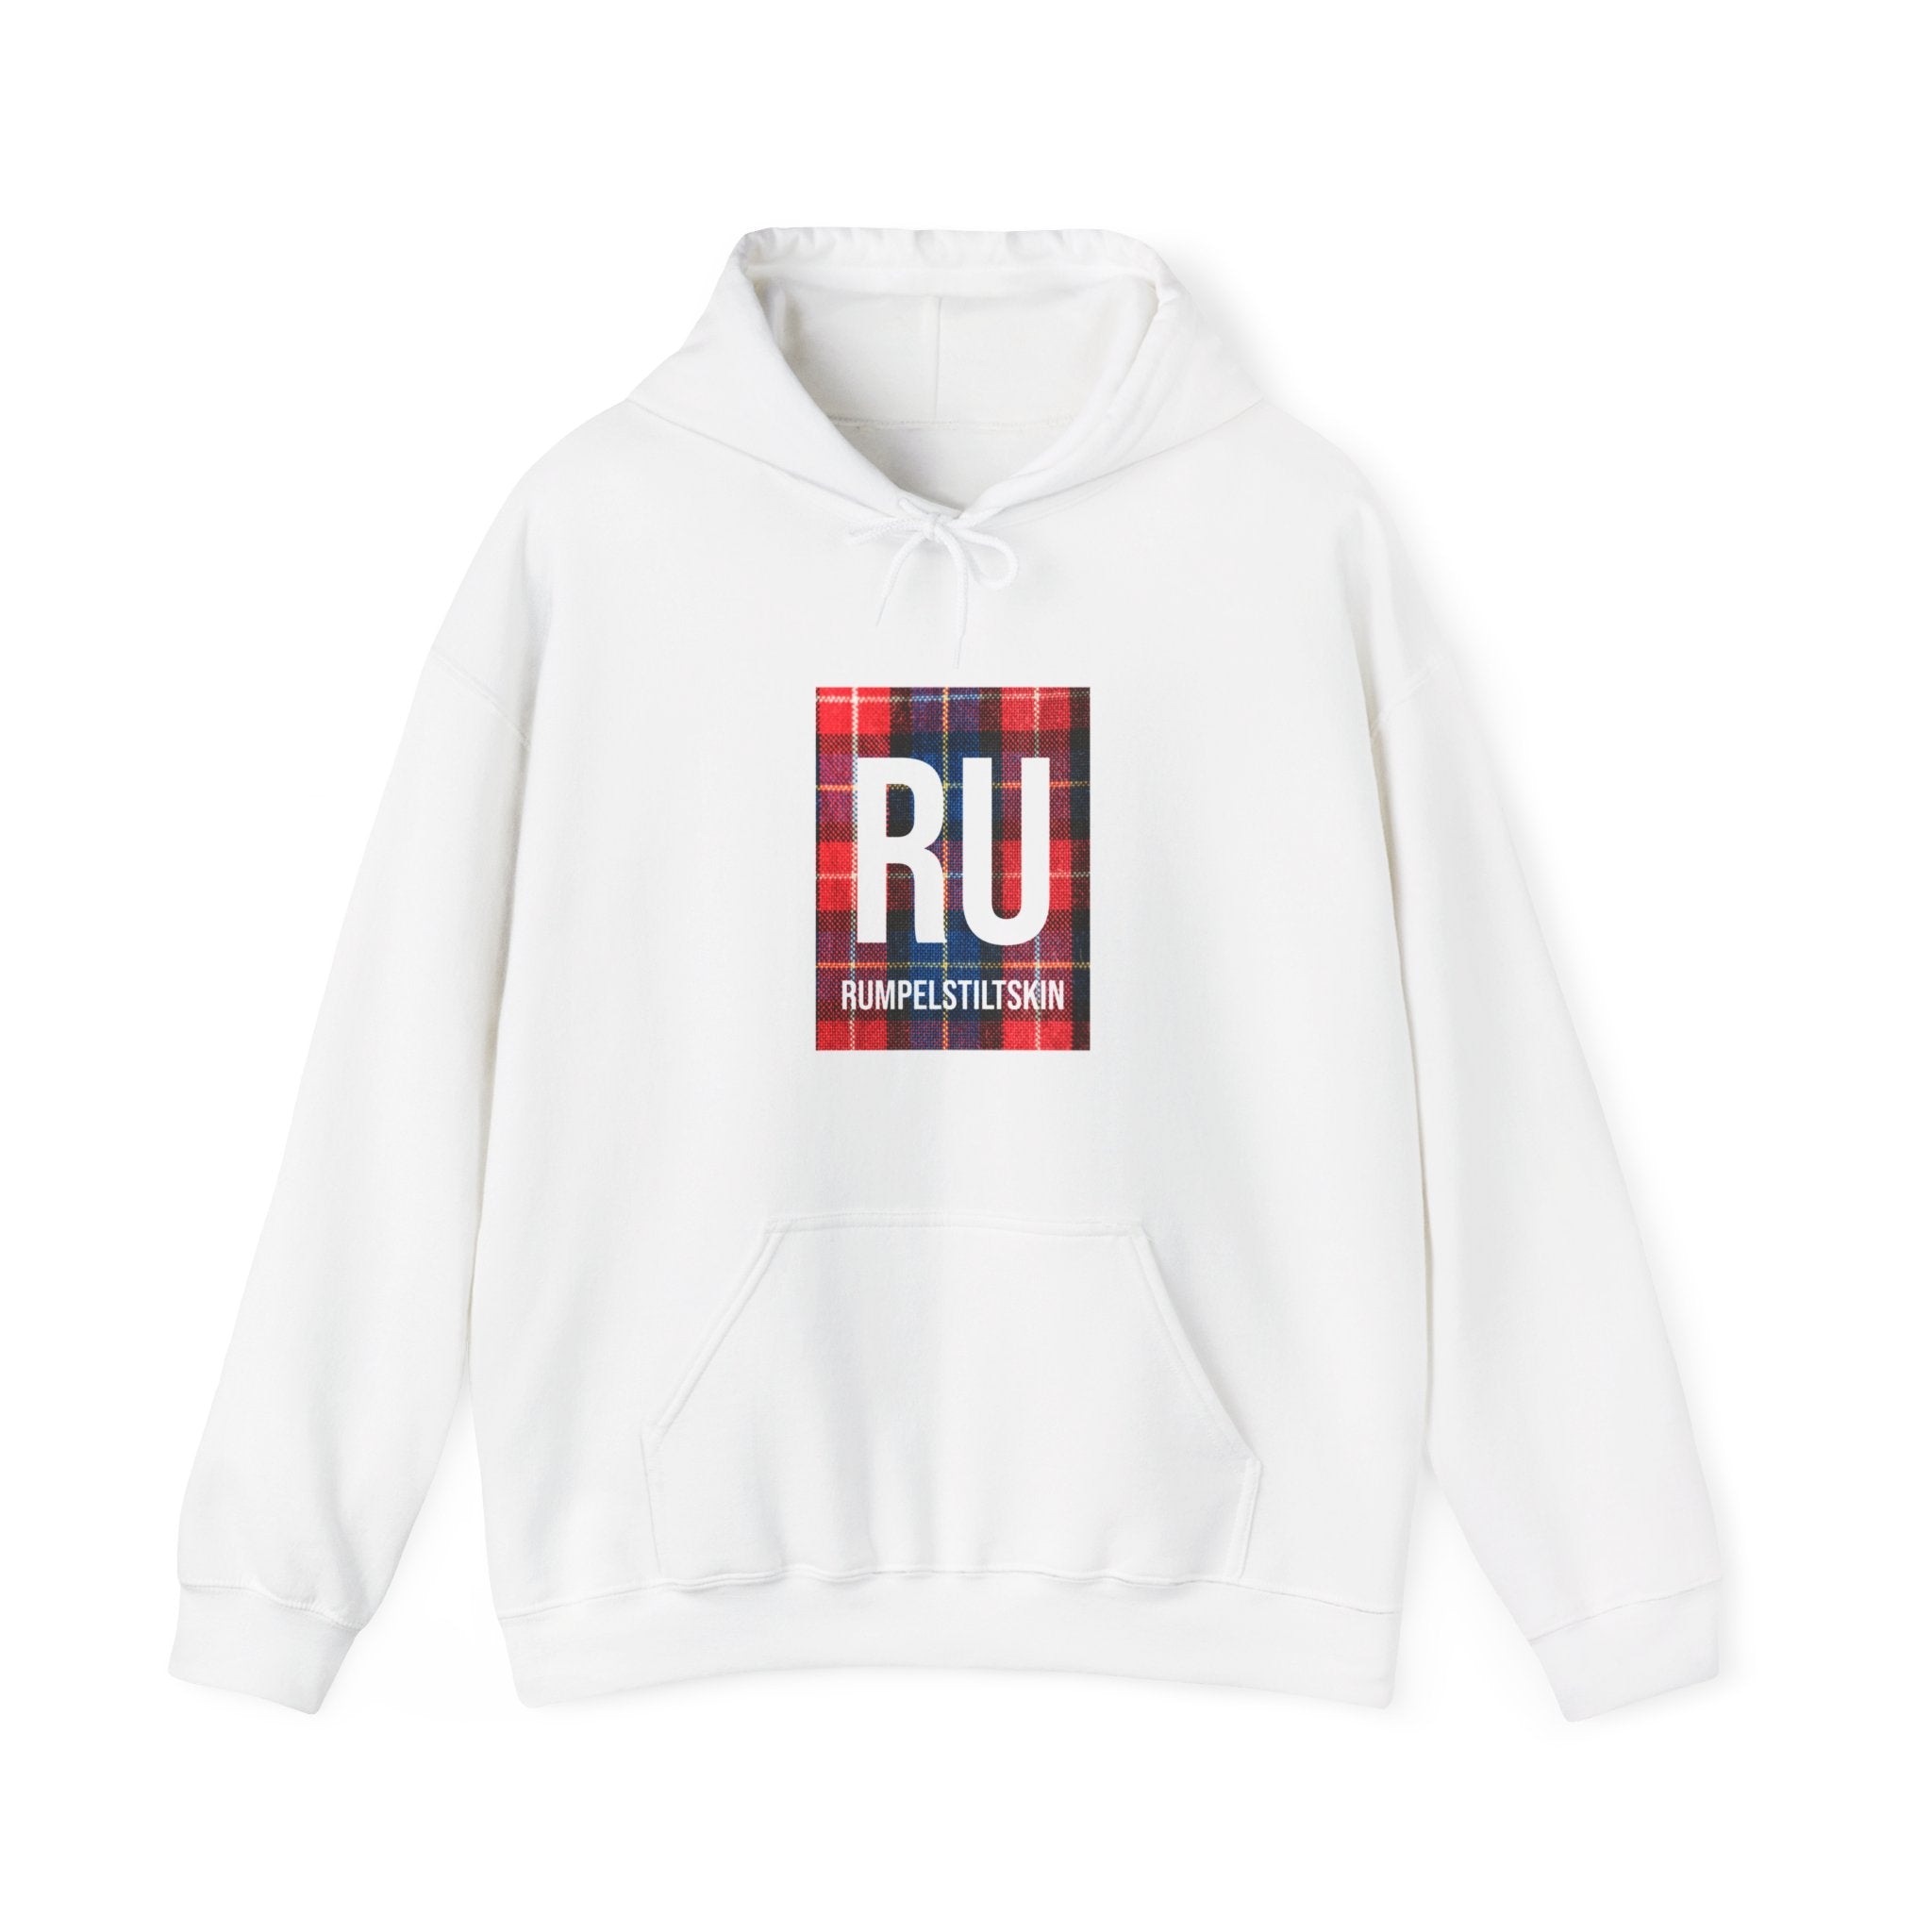 This RU - Hooded Sweatshirt offers ultimate comfort with its white fabric, front pocket, and a stylish design featuring "RU" and "RUMPELSTILTSKIN" on a plaid background on the chest.